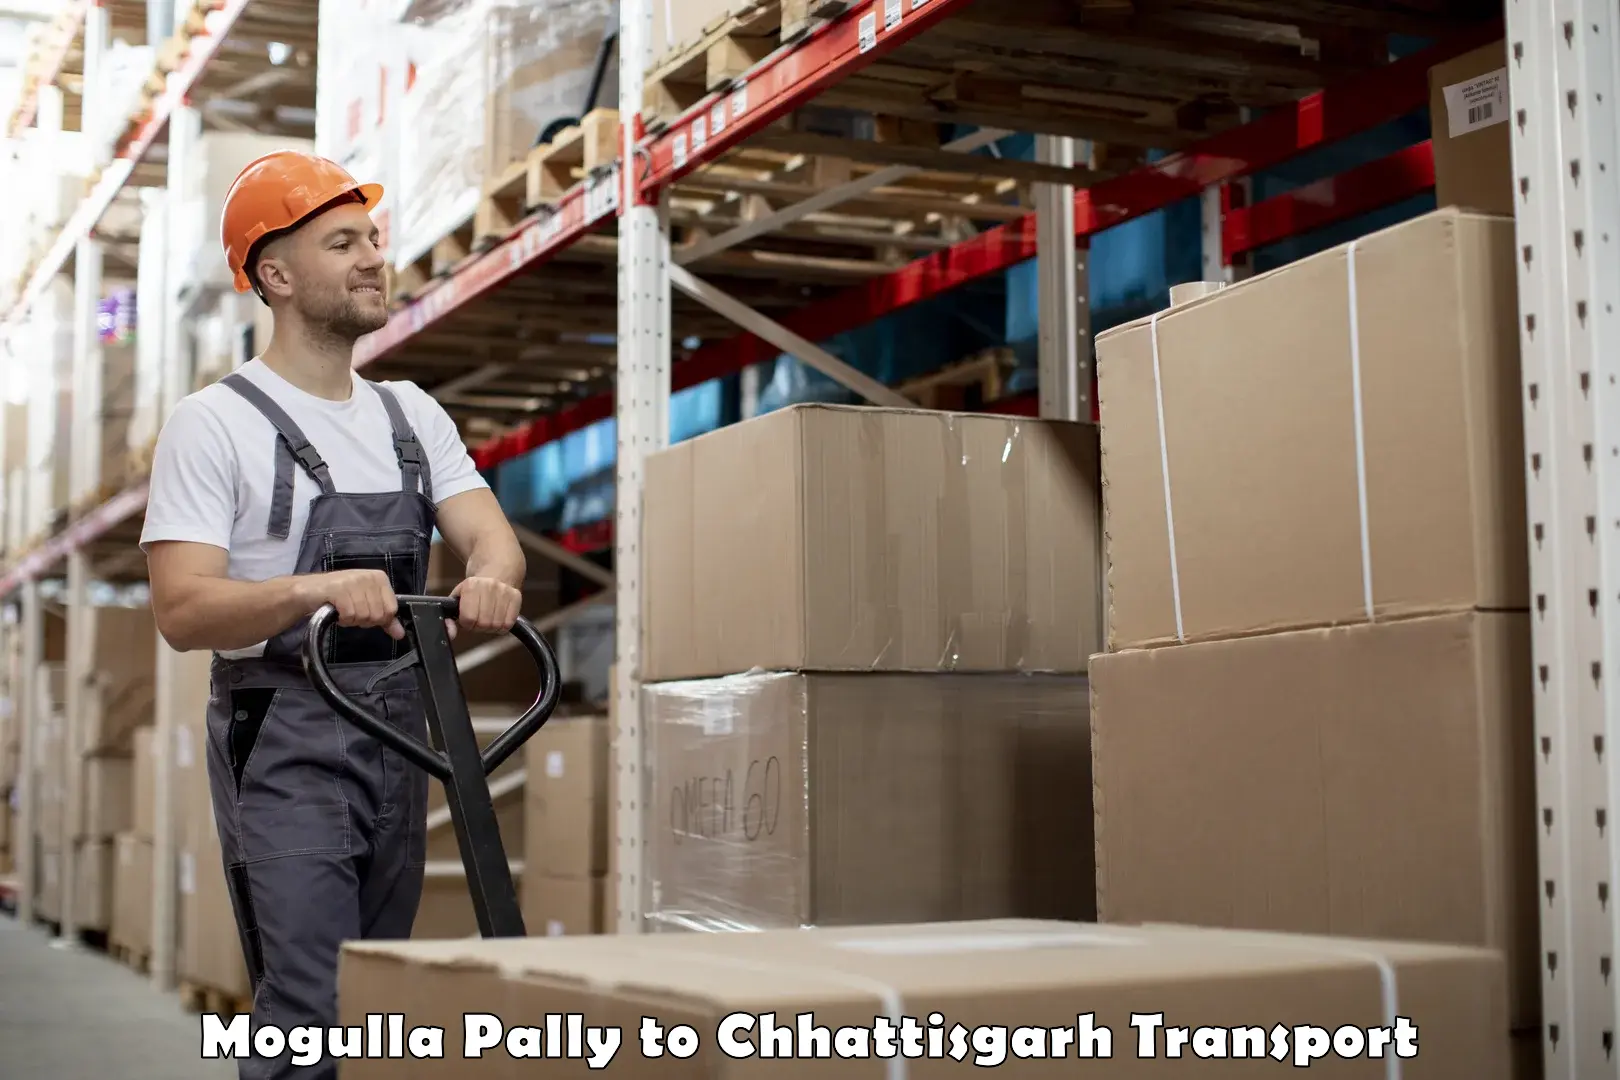 Truck transport companies in India Mogulla Pally to Raipur